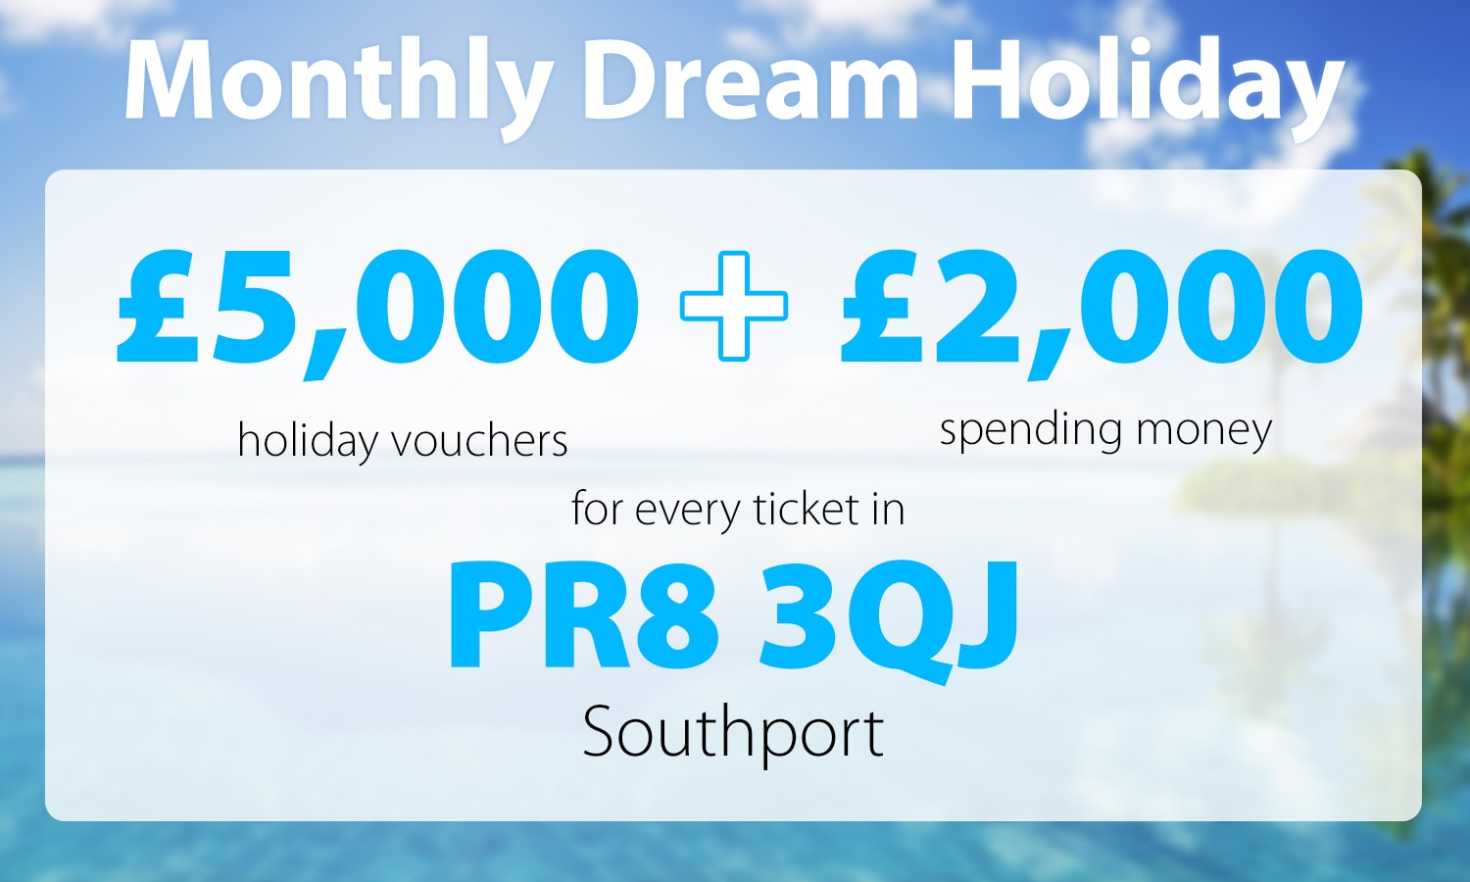 A lucky player from Southport will be packing their suitcases after their Dream Holiday win